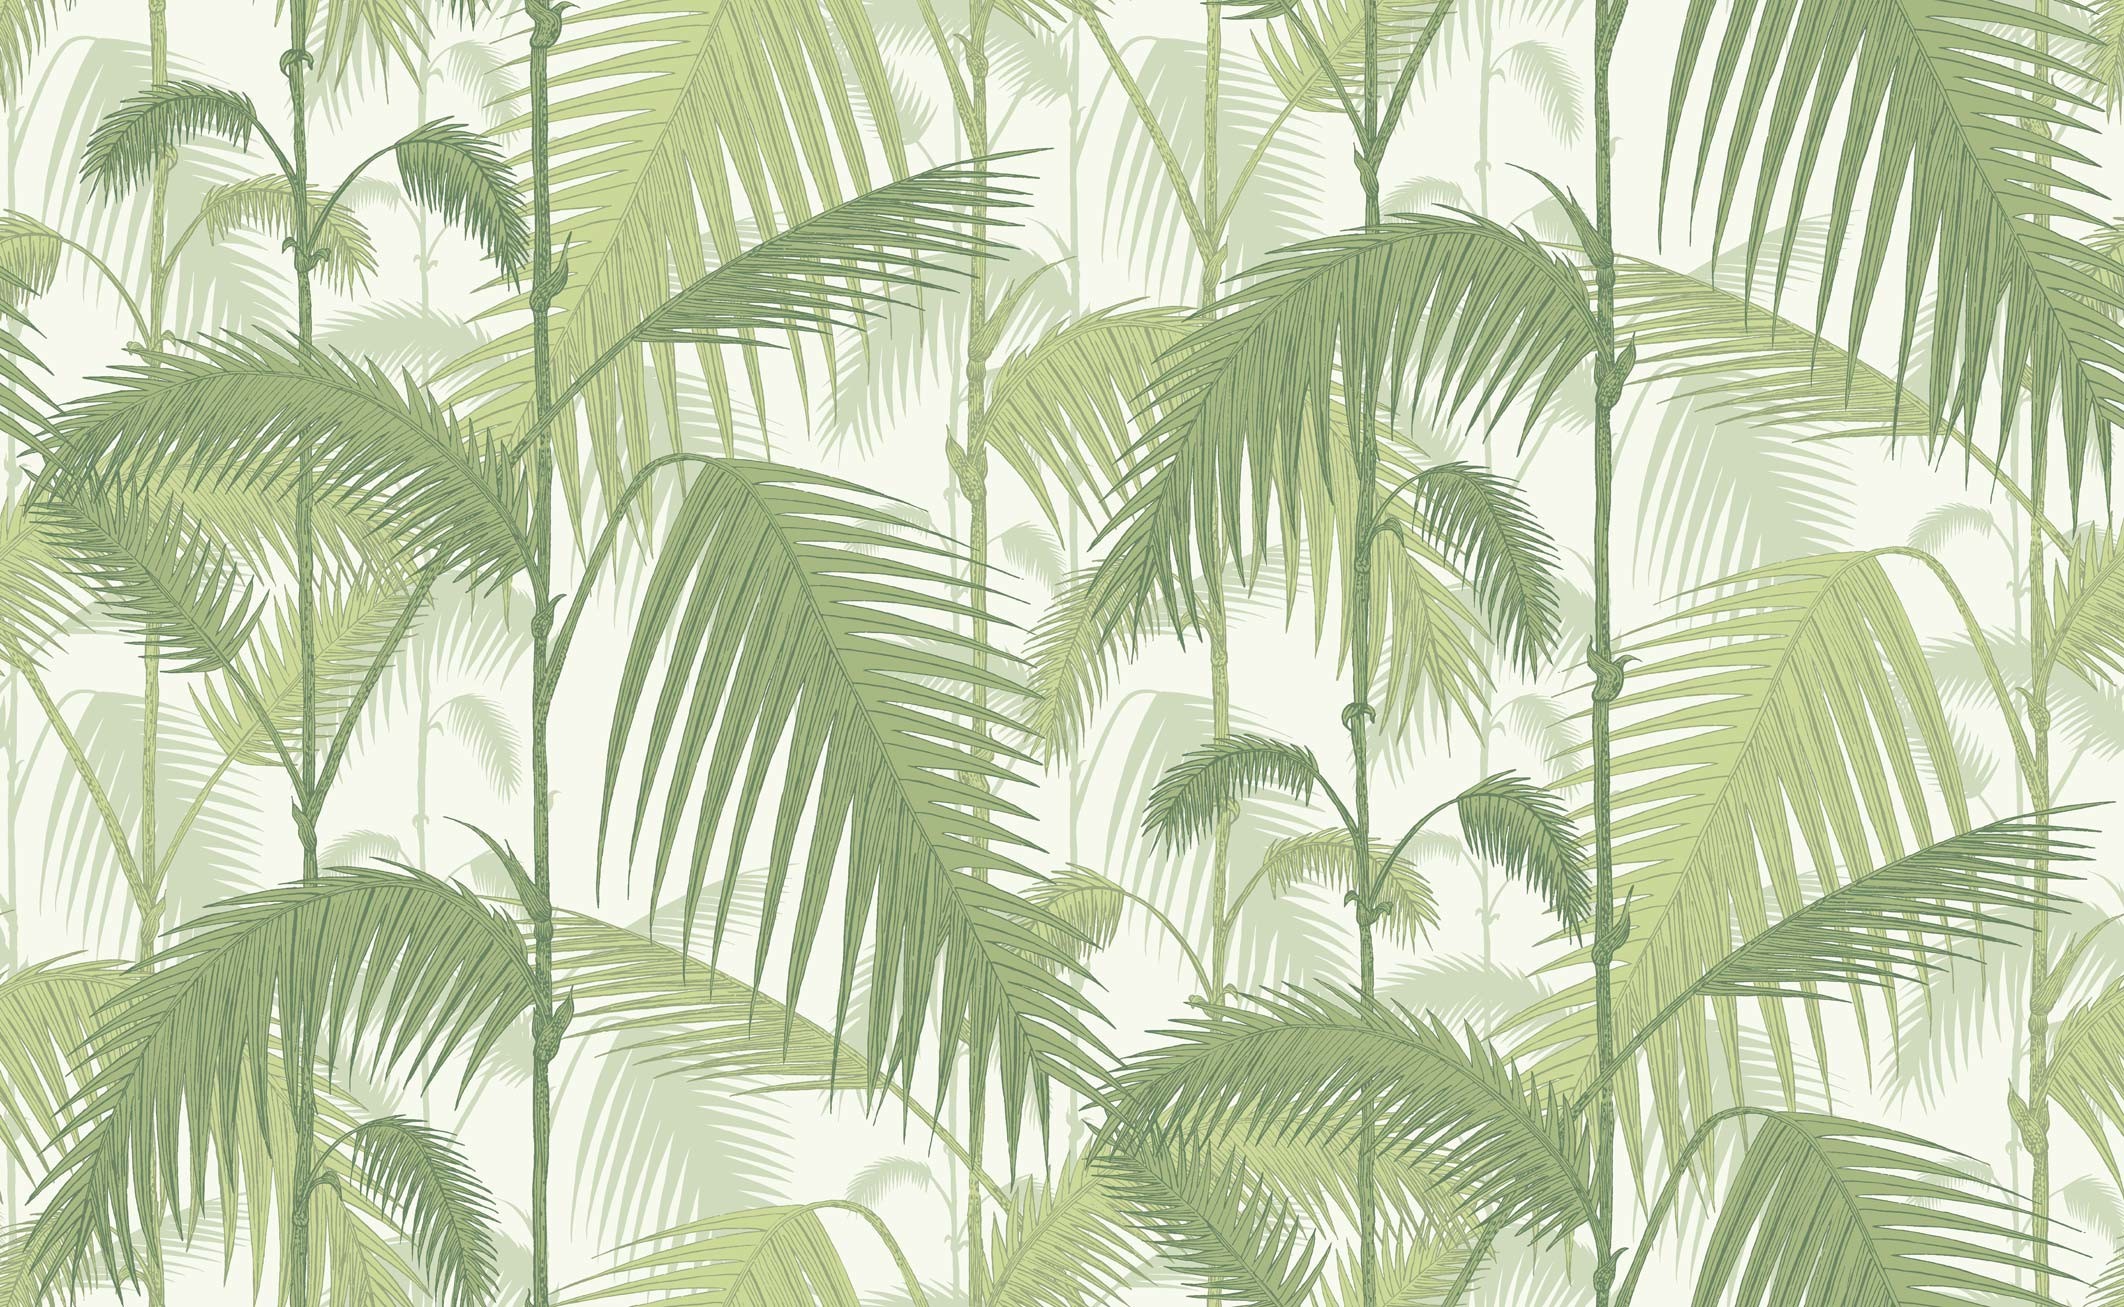 2124x1307 ... Palm Jungle wallpaper - Olive Green on White ...